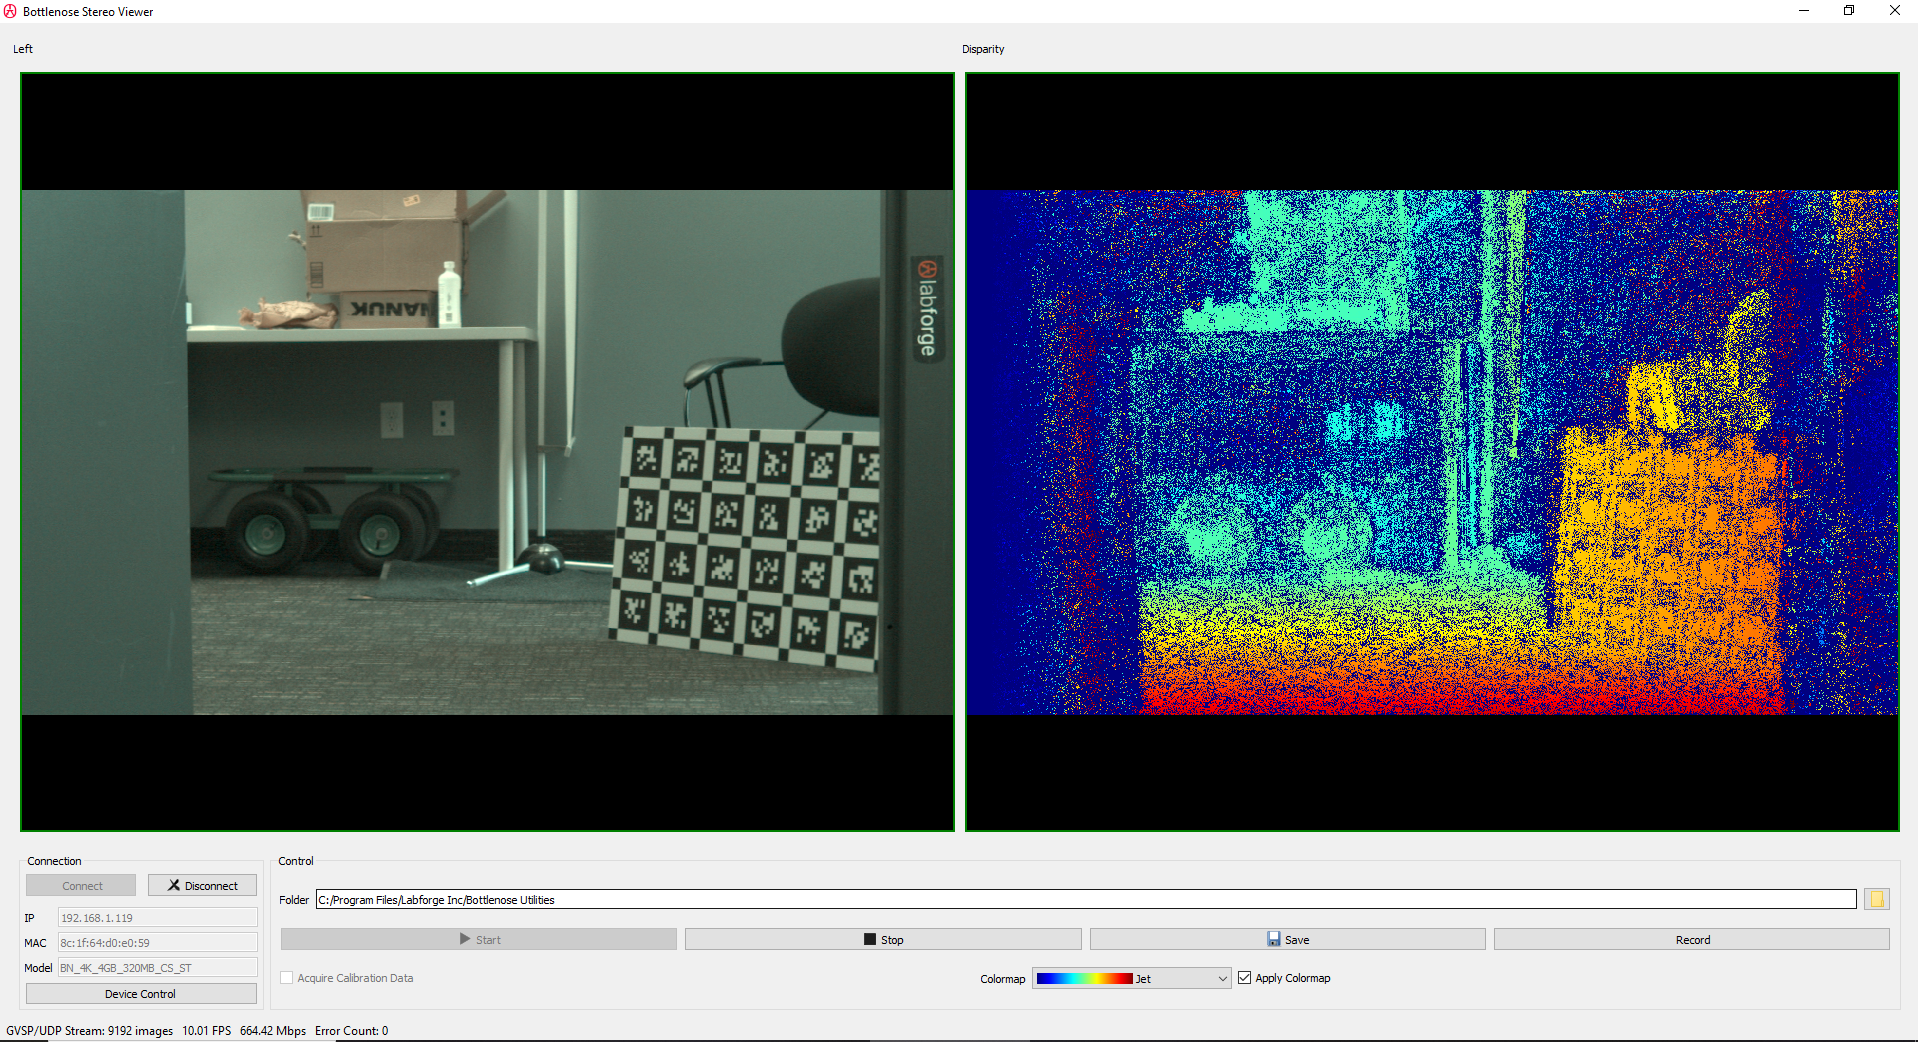 A screenshot of Stereo Viewer displaying disparity and the corresponding left image